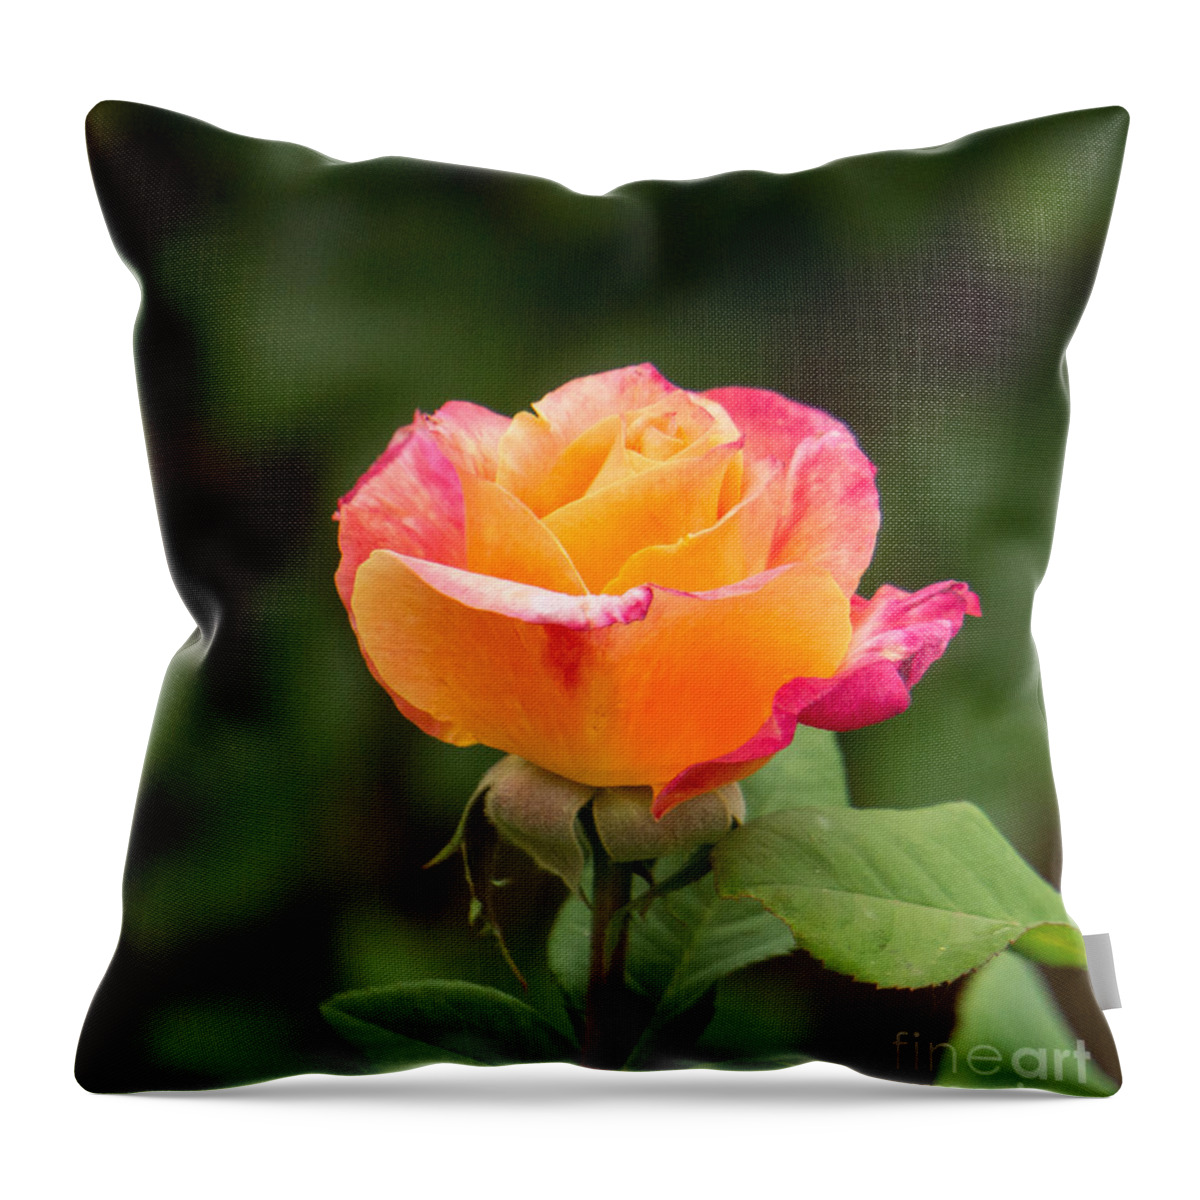 Rose Throw Pillow featuring the photograph Sunset Rose by Weir Here And There